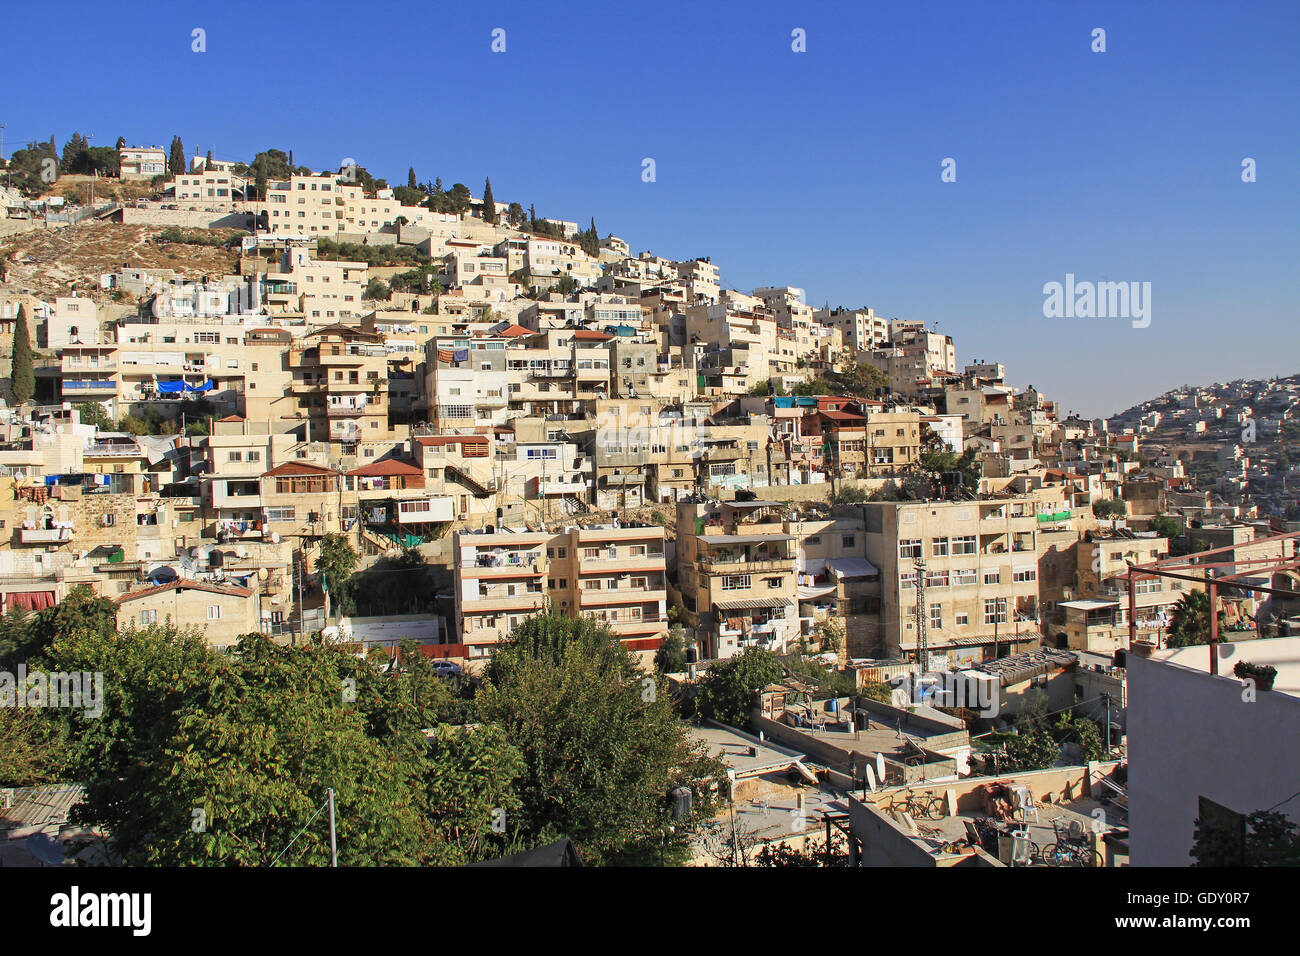 Homes On A Hillside In Israel As Seen From Near The Old City Of